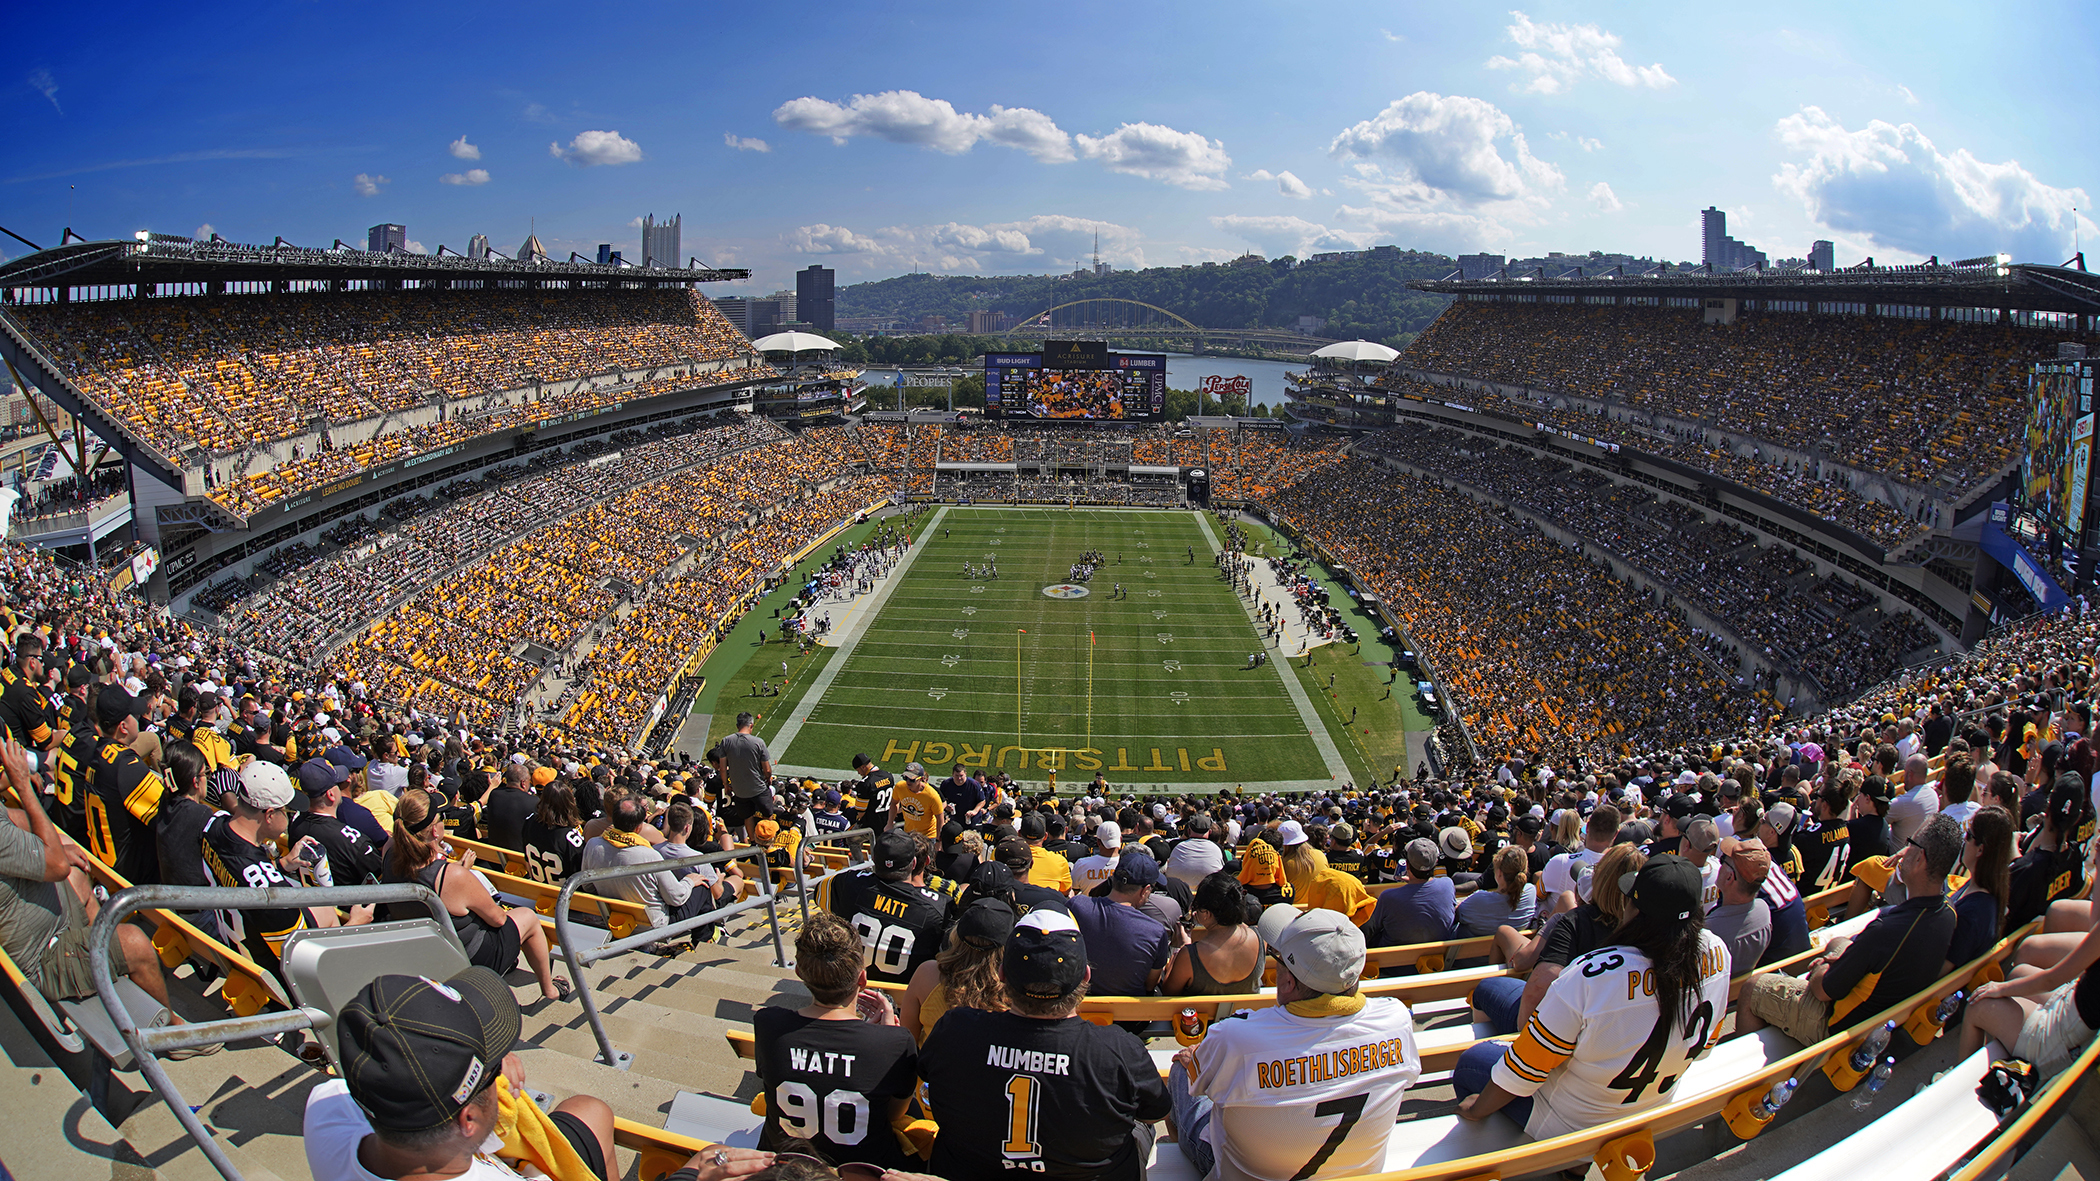 spectator-at-steelers-game-dies-after-fall-from-escalator